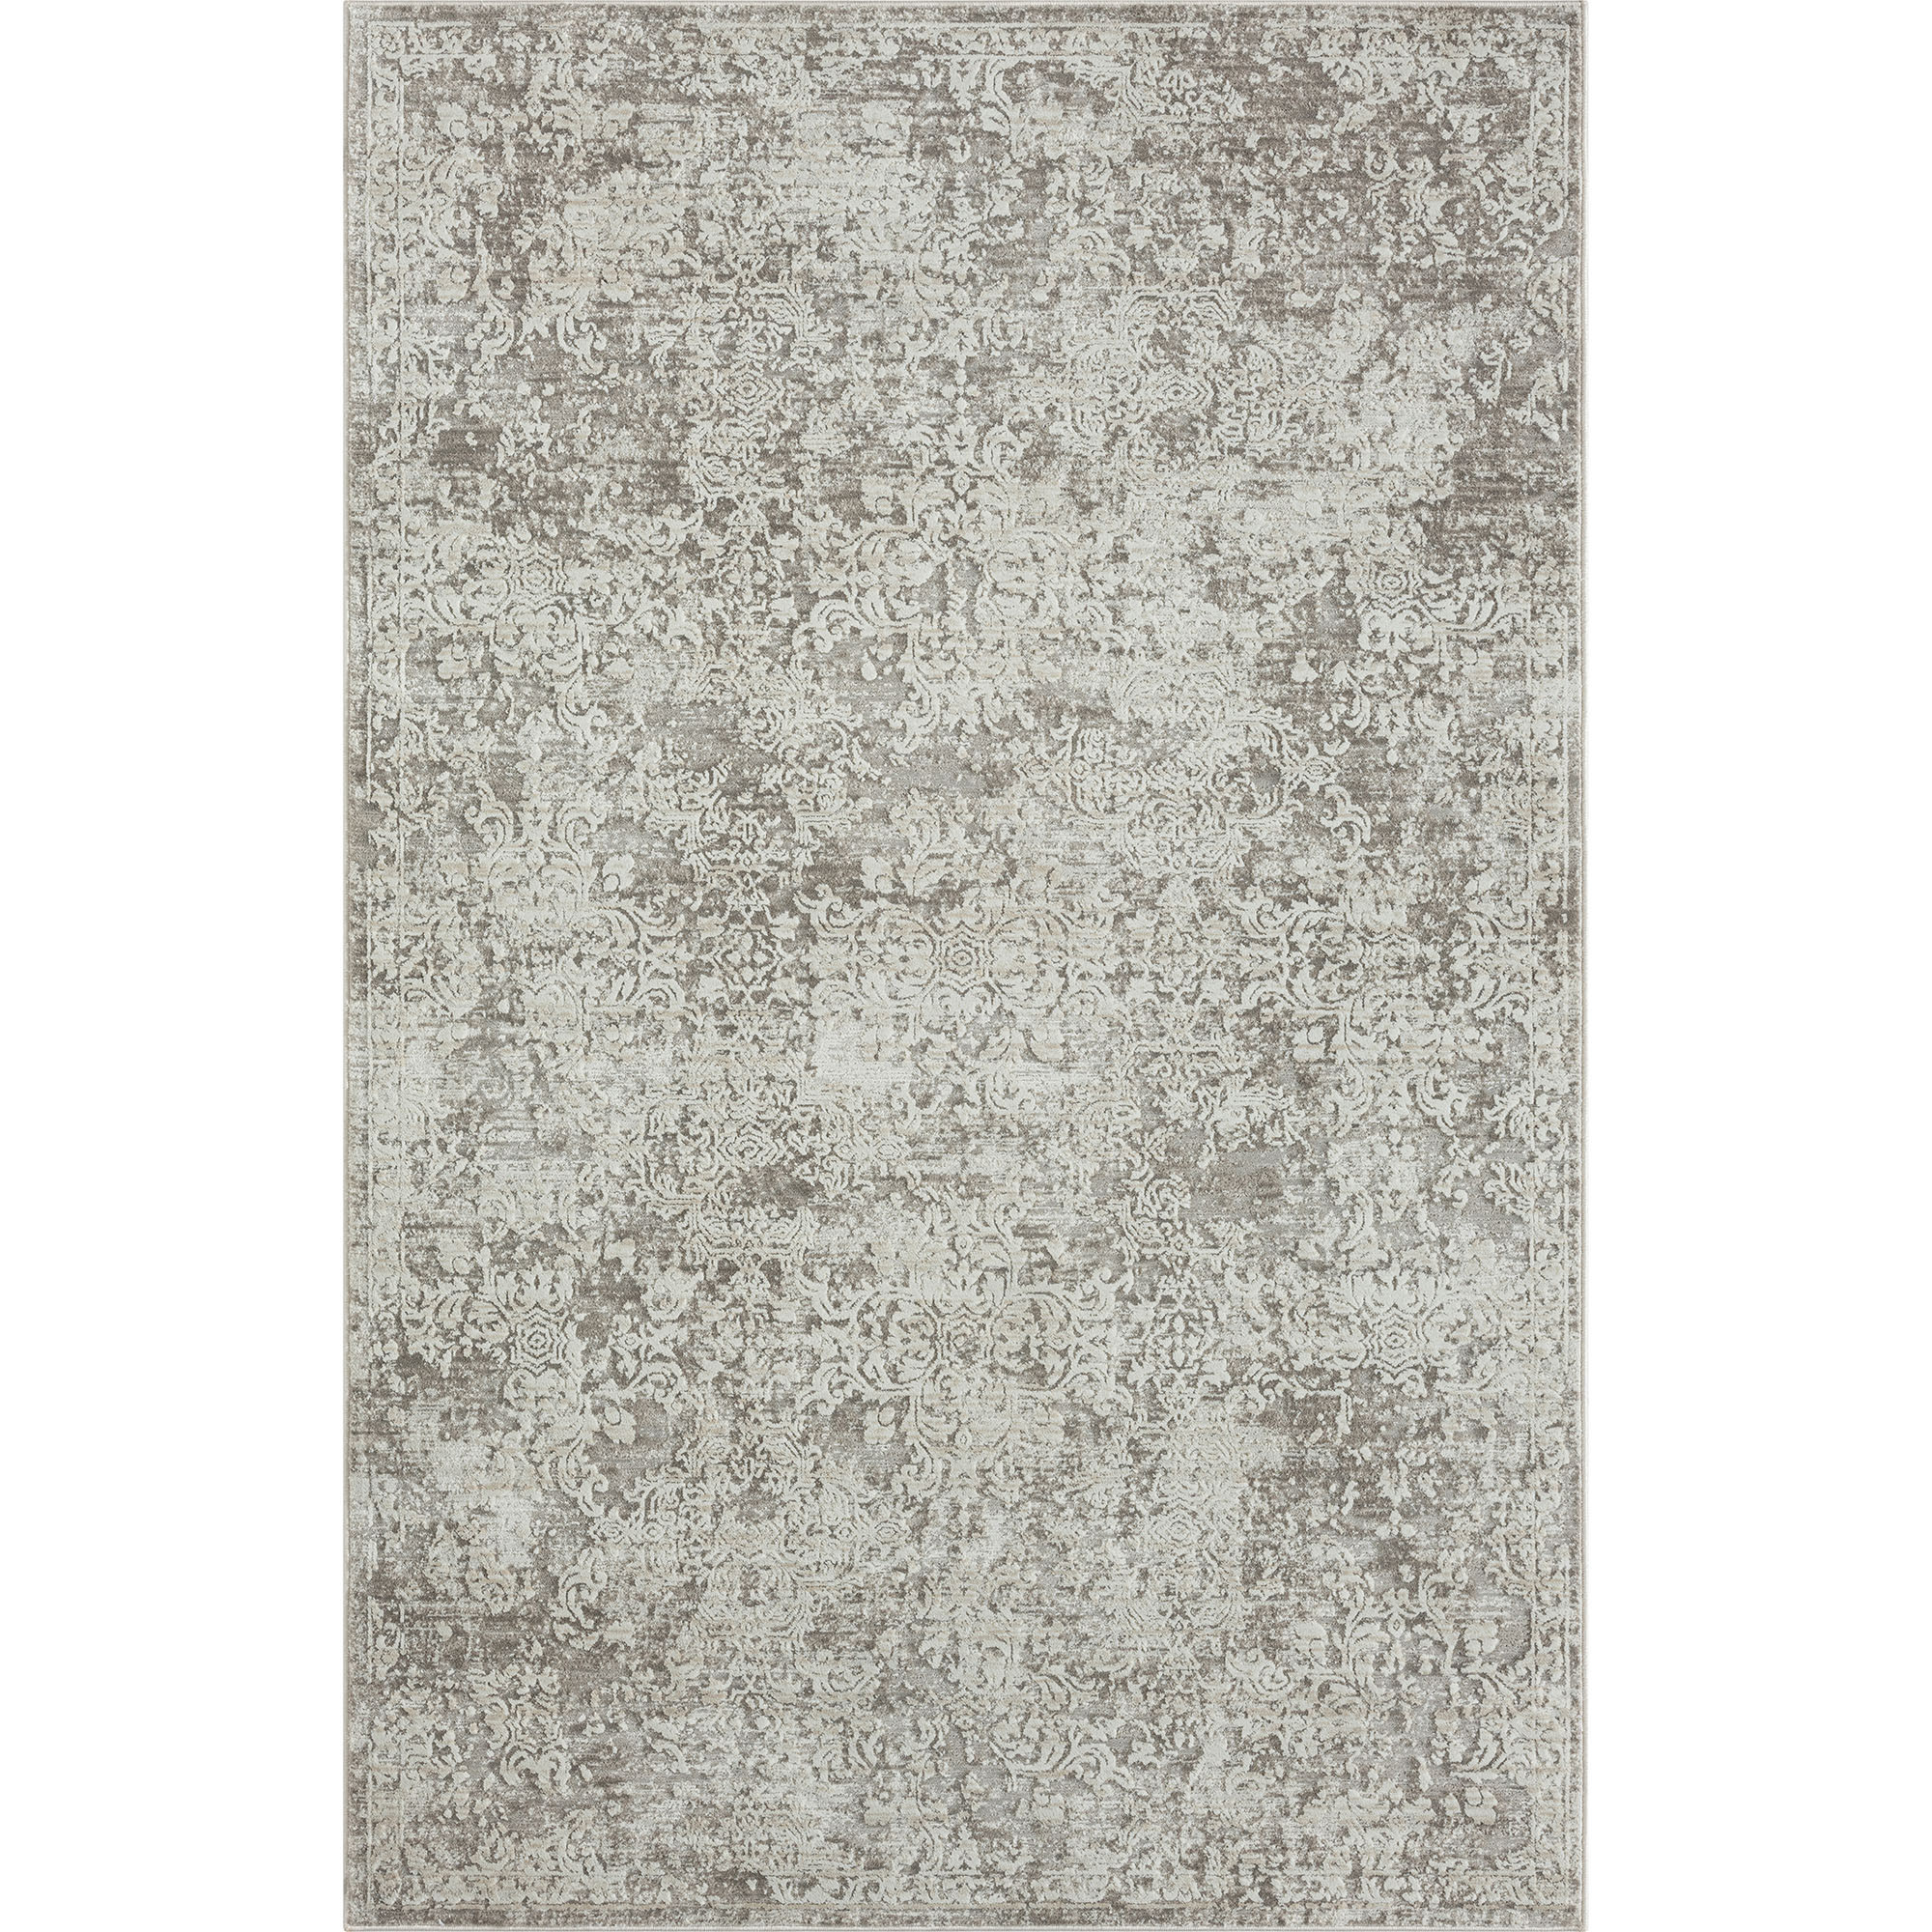 8' X 10' Gray Abstract Distressed Area Rug-515956-1